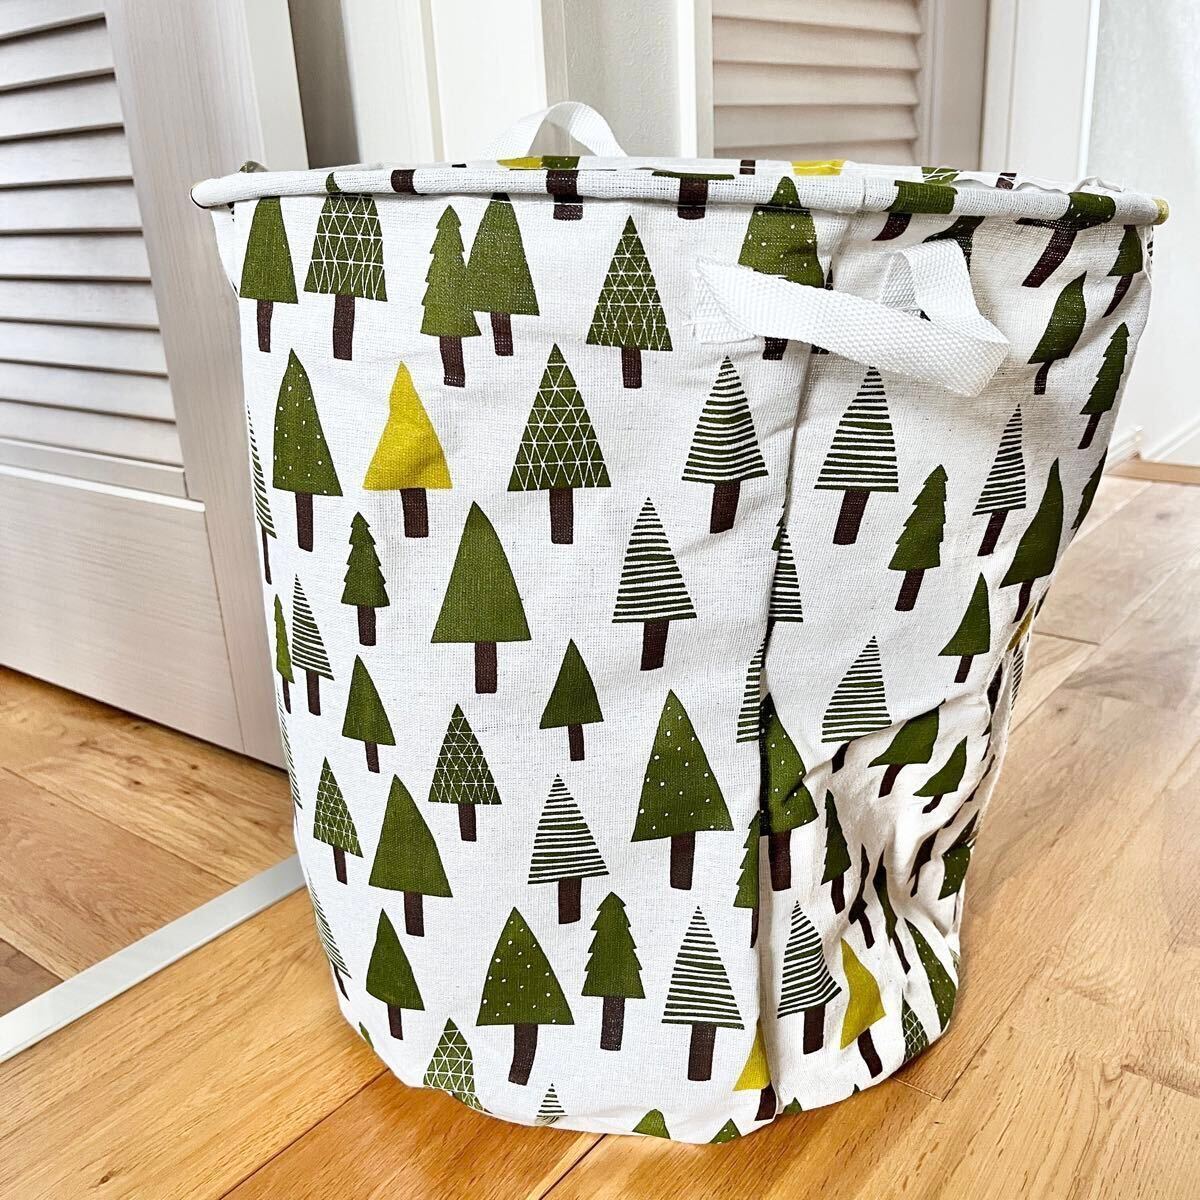  laundry basket water-repellent laundry bag laundry basket box basket folding tree forest compact 